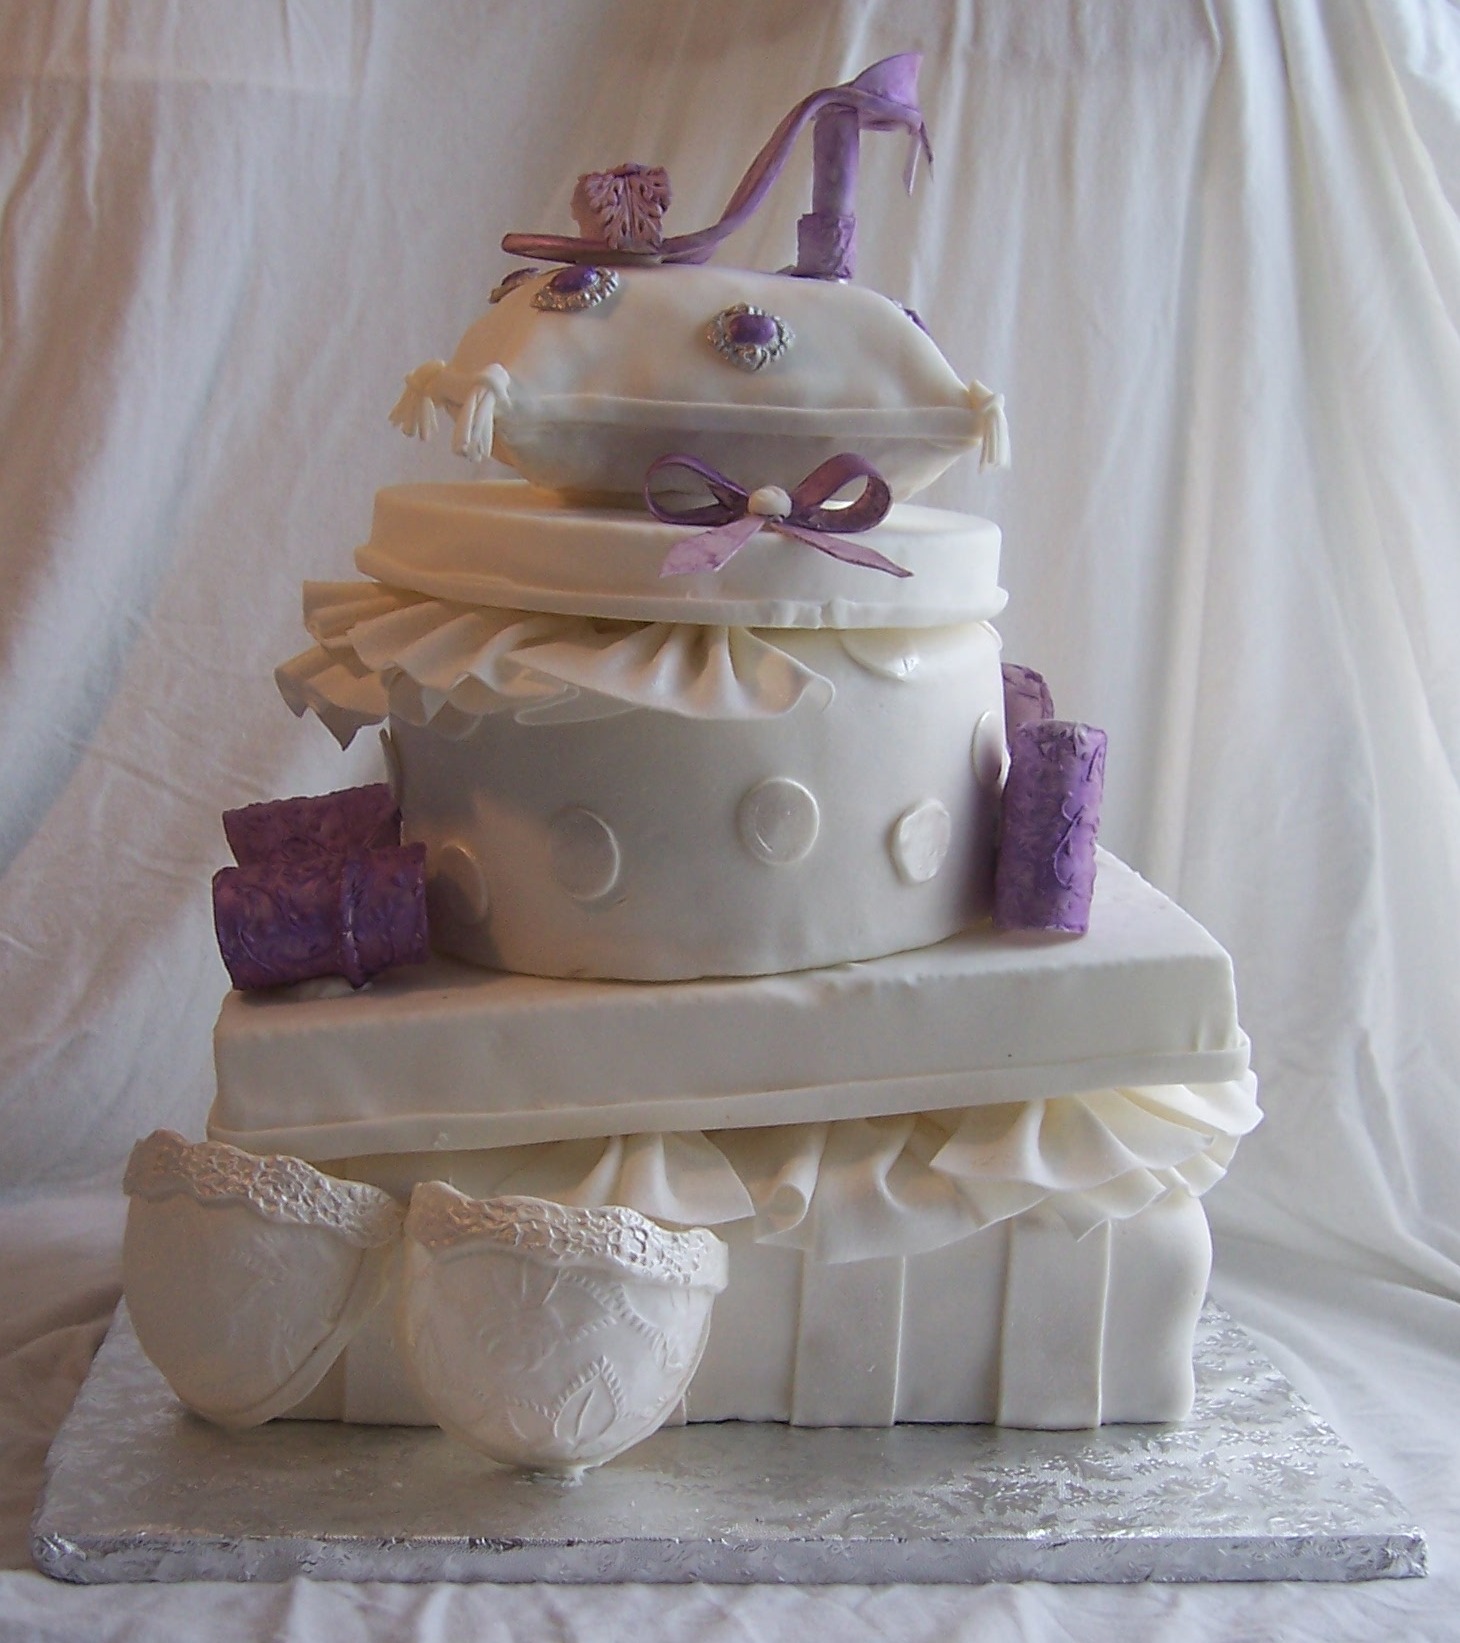 Metta's Bridal Shower cake of Stacked presents, purple shoe